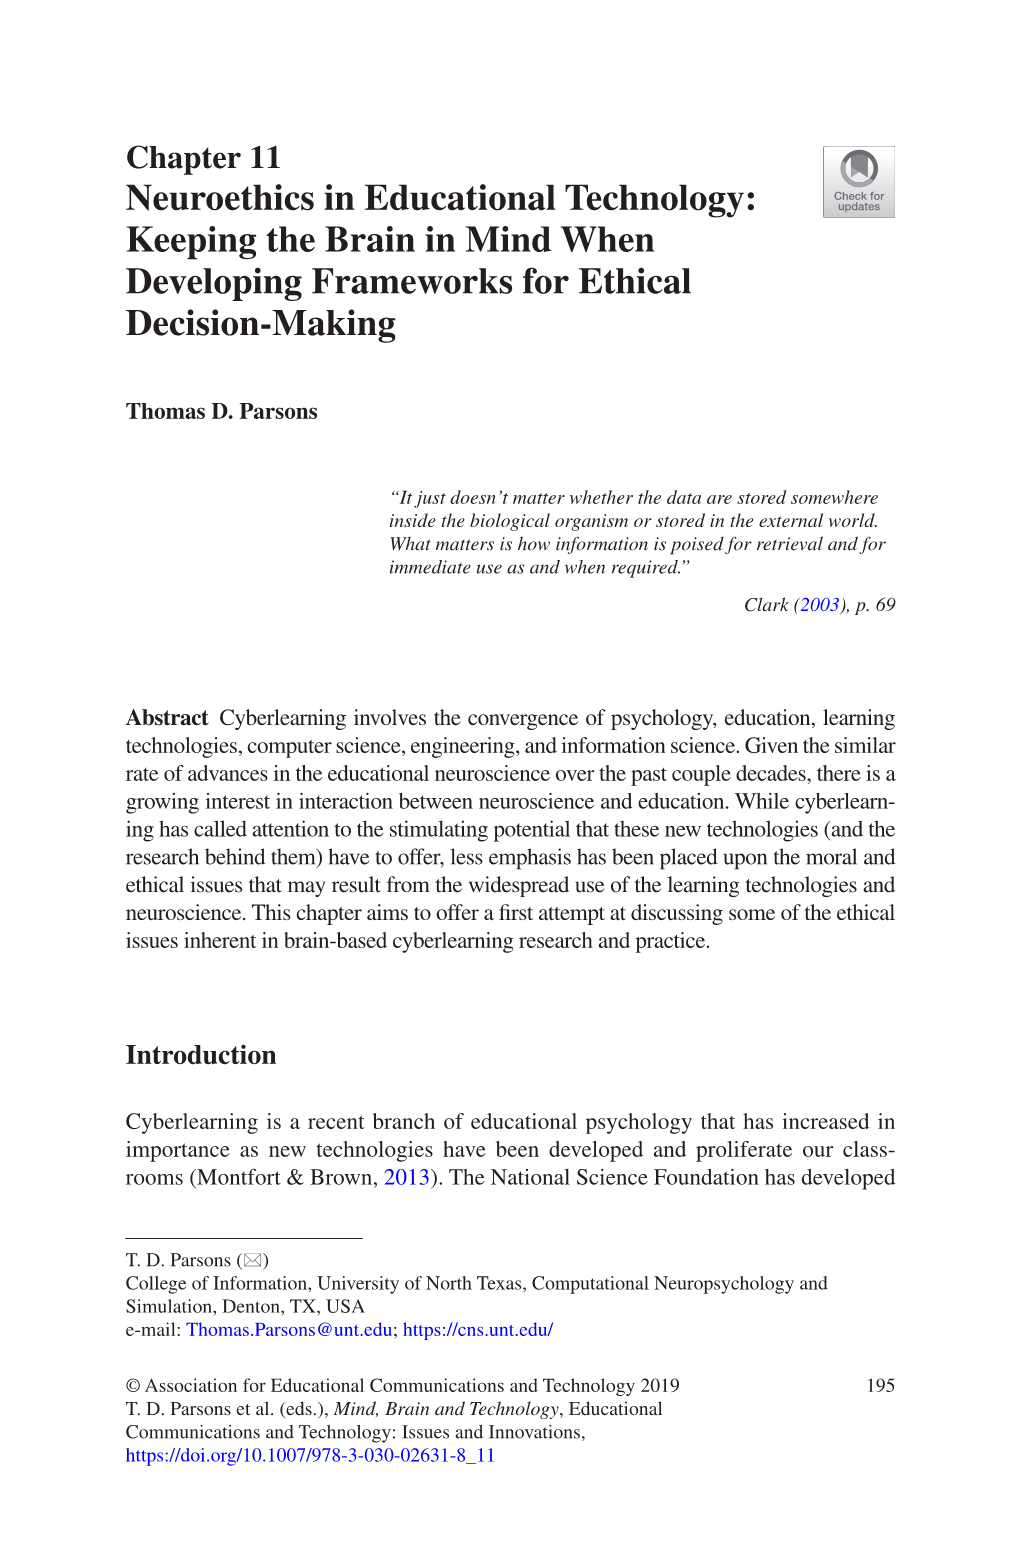 Neuroethics in Educational Technology: Keeping the Brain in Mind When Developing Frameworks for Ethical Decision-Making